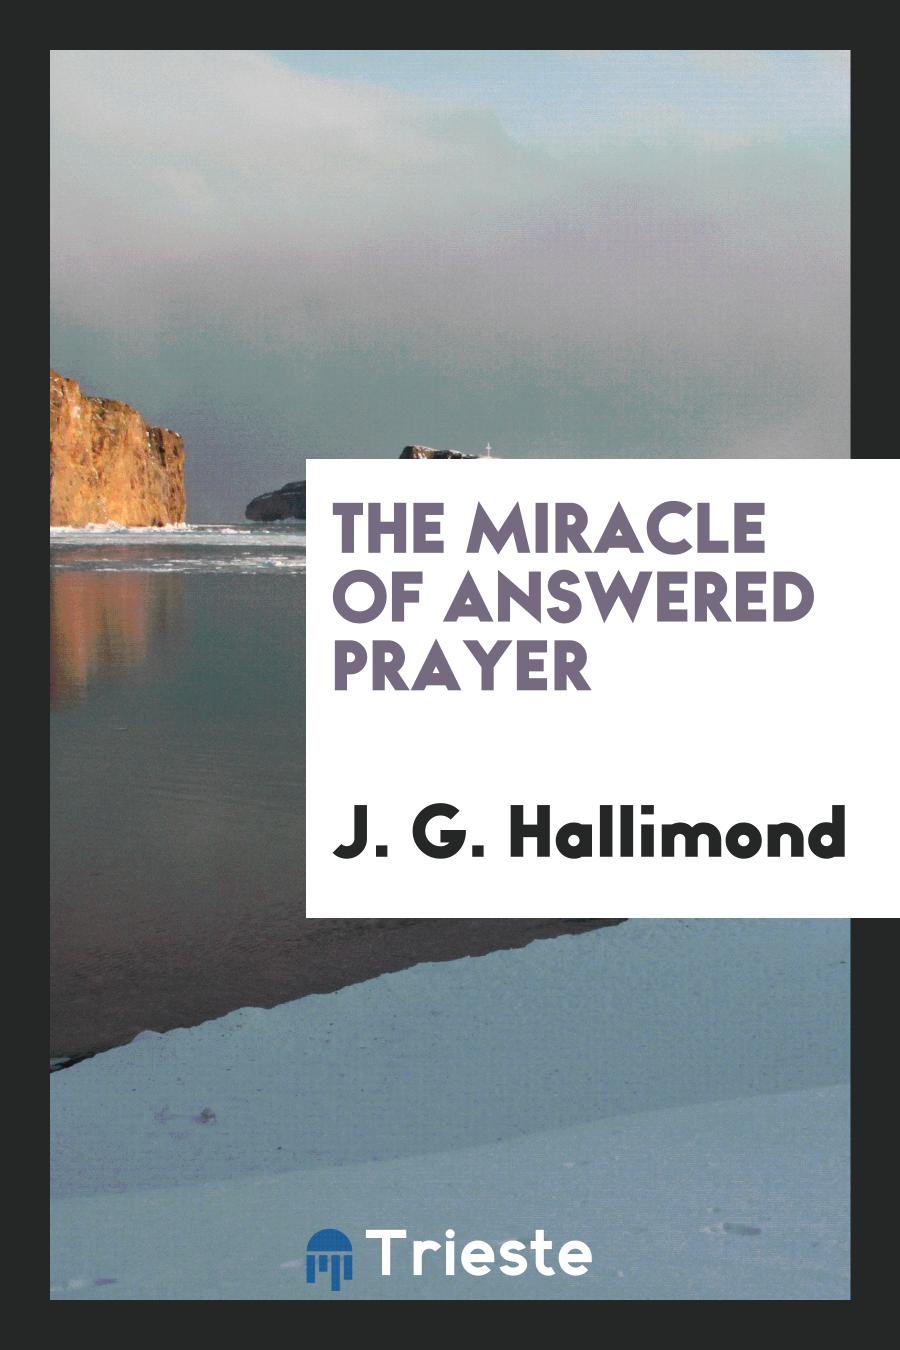 The Miracle of Answered Prayer